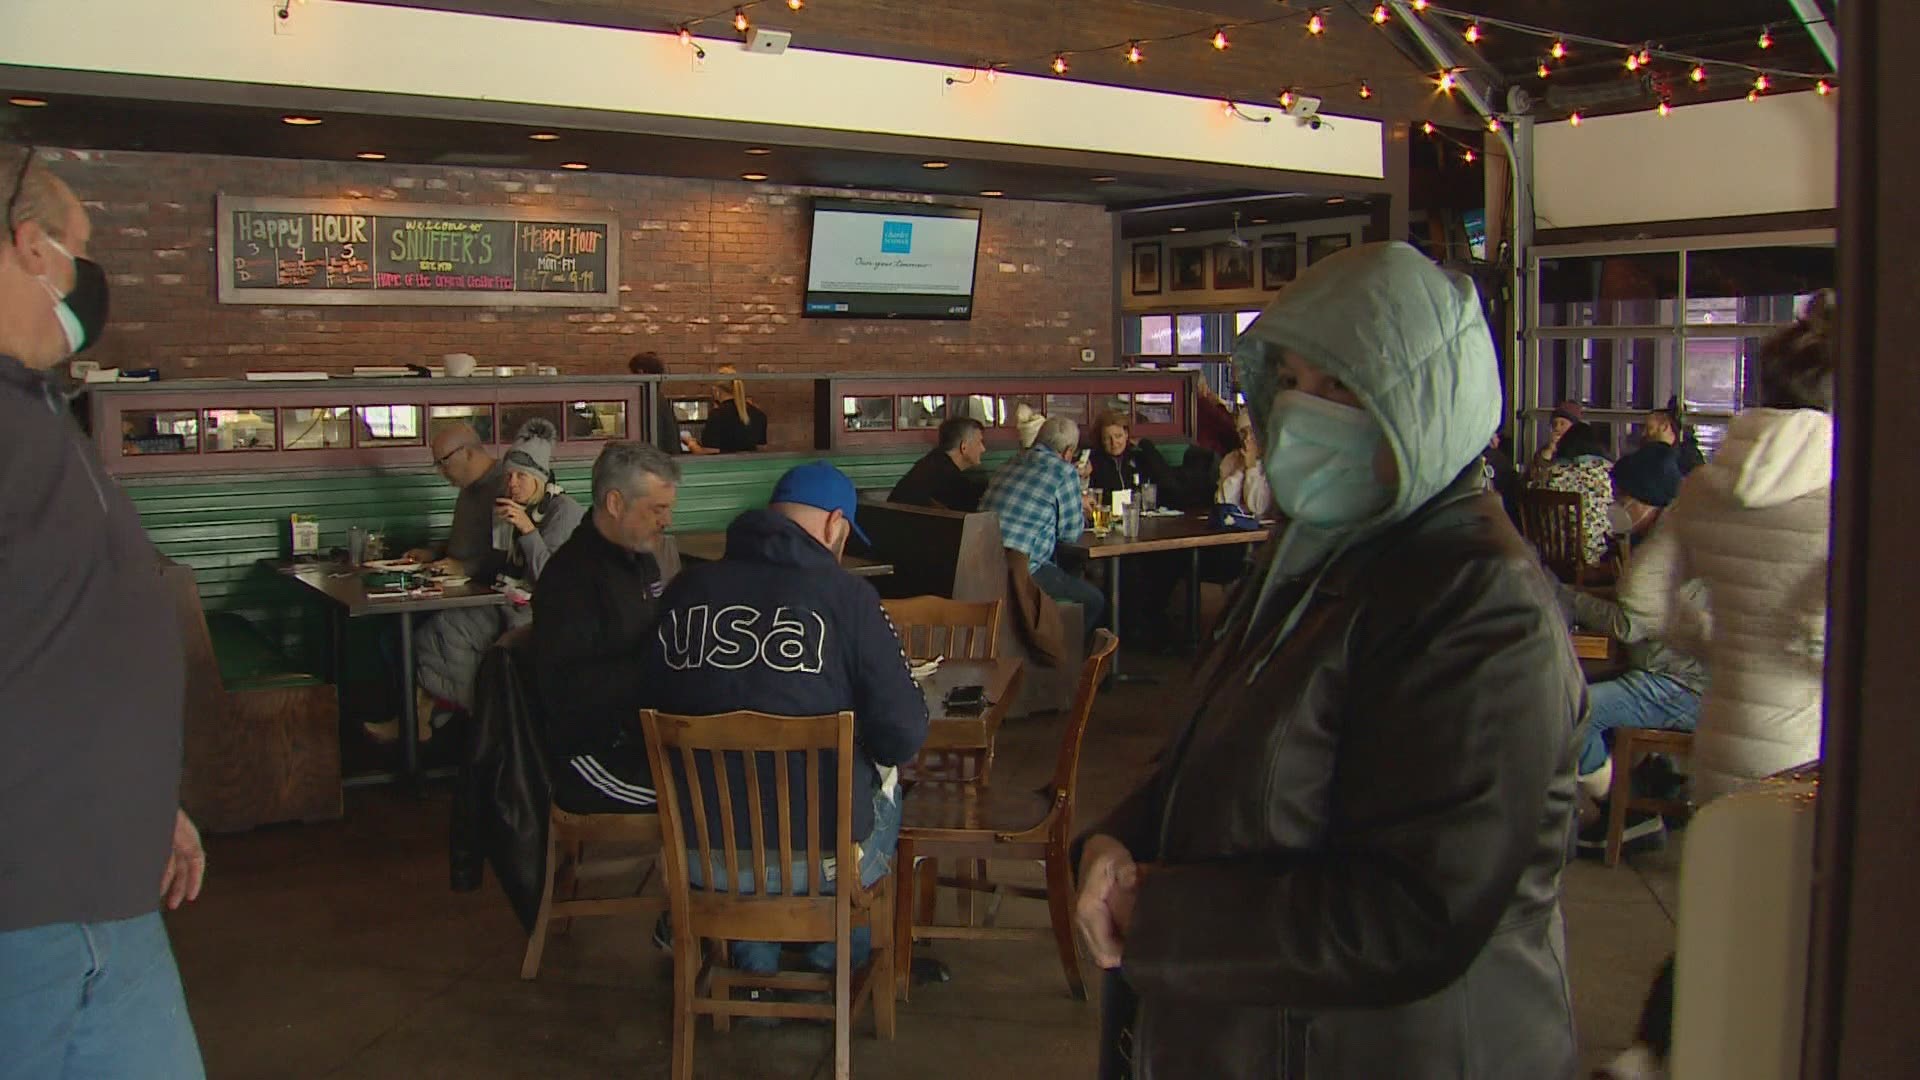 WFAA has compiled a list of local restaurants that are open in the next few days during the extreme cold.